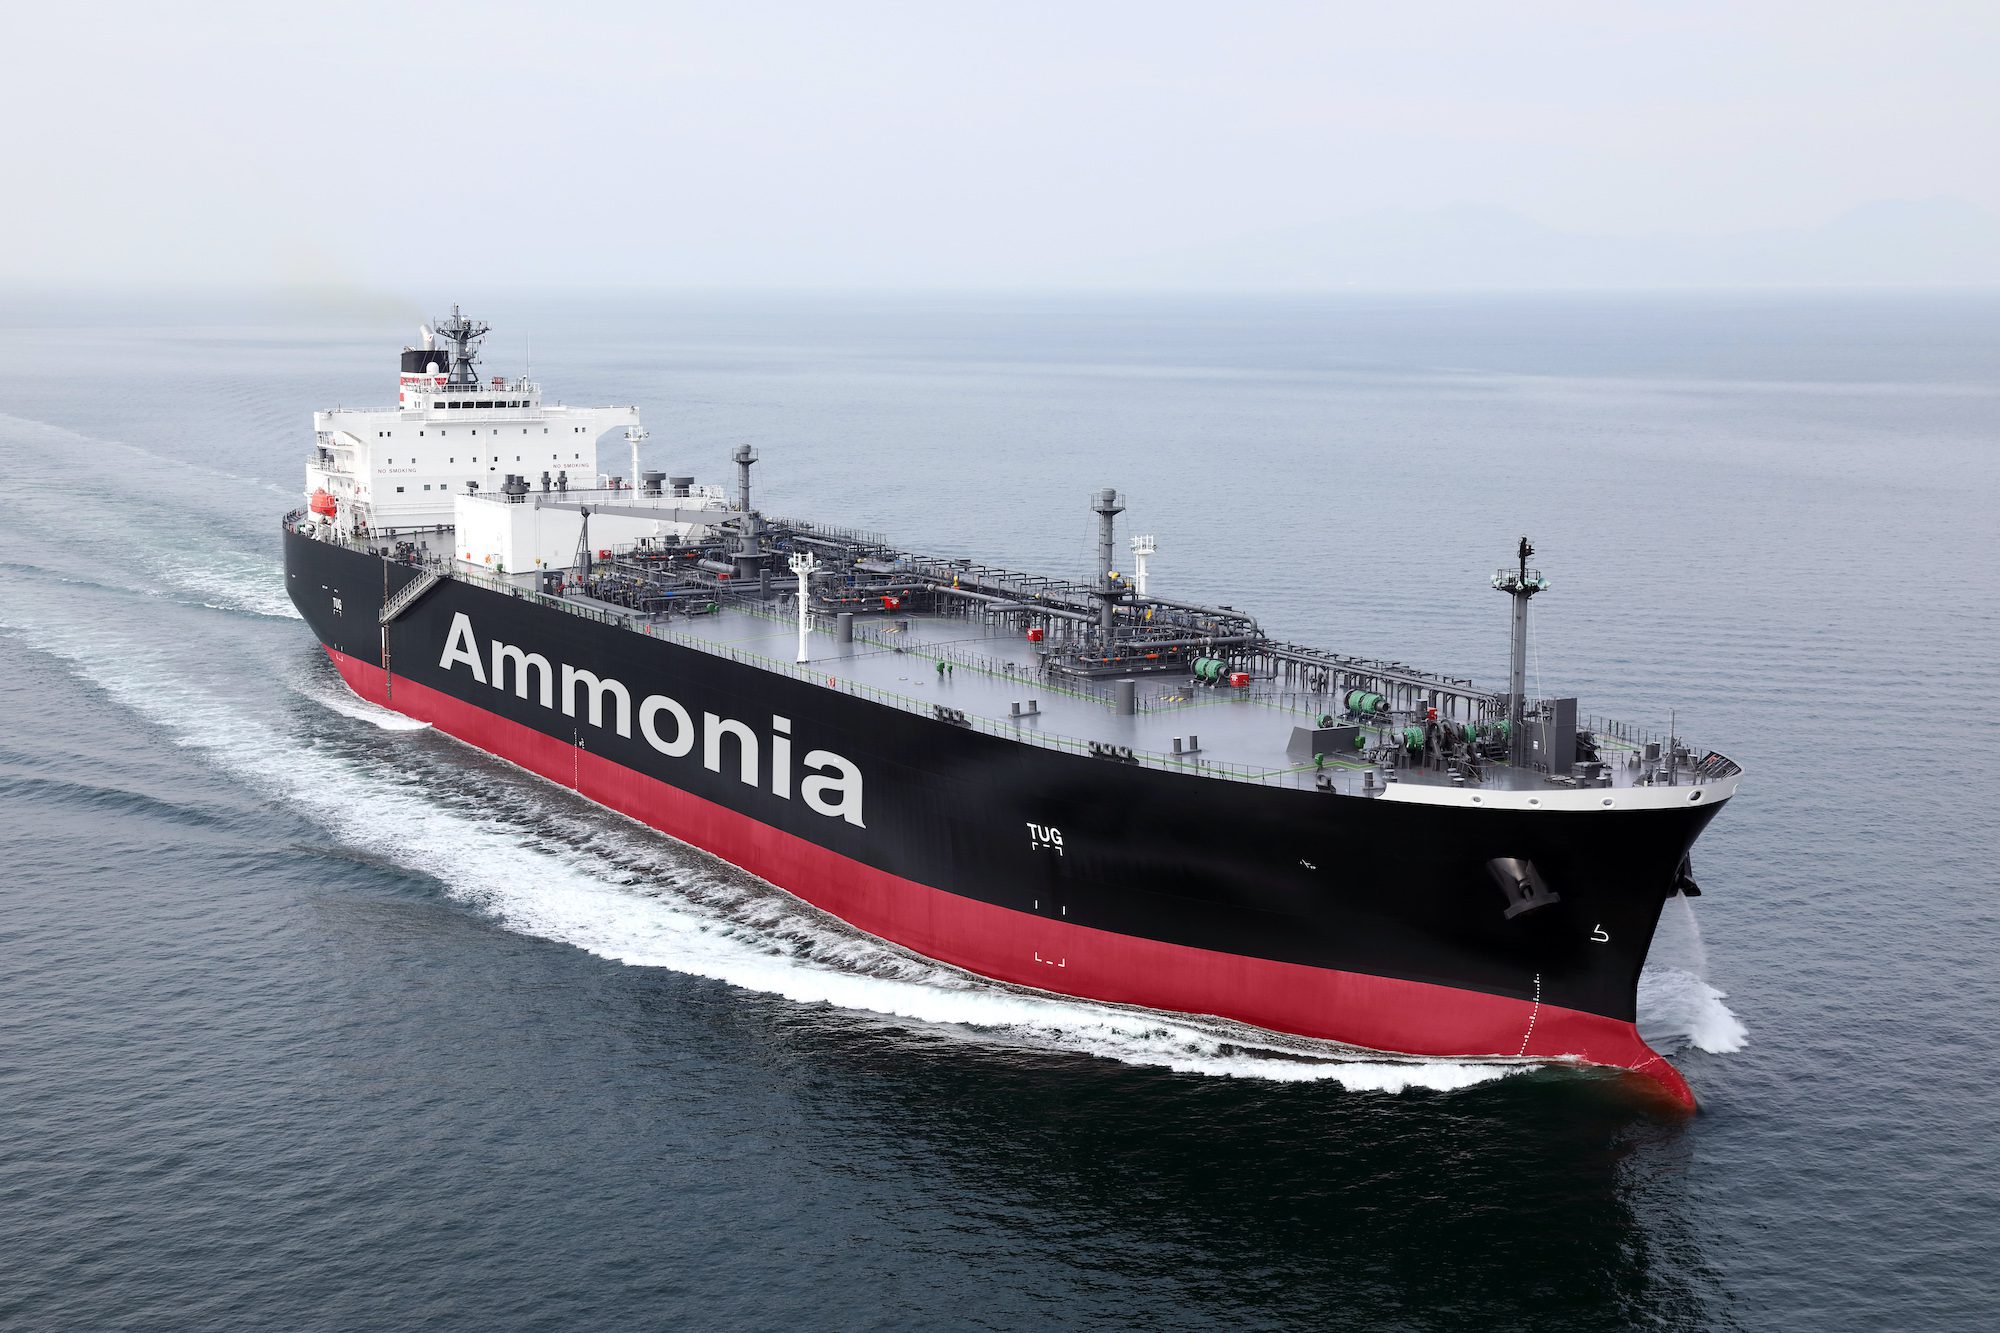 JERA to Study Large-Scale Ammonia Fuel Transportation with NYK and MOL